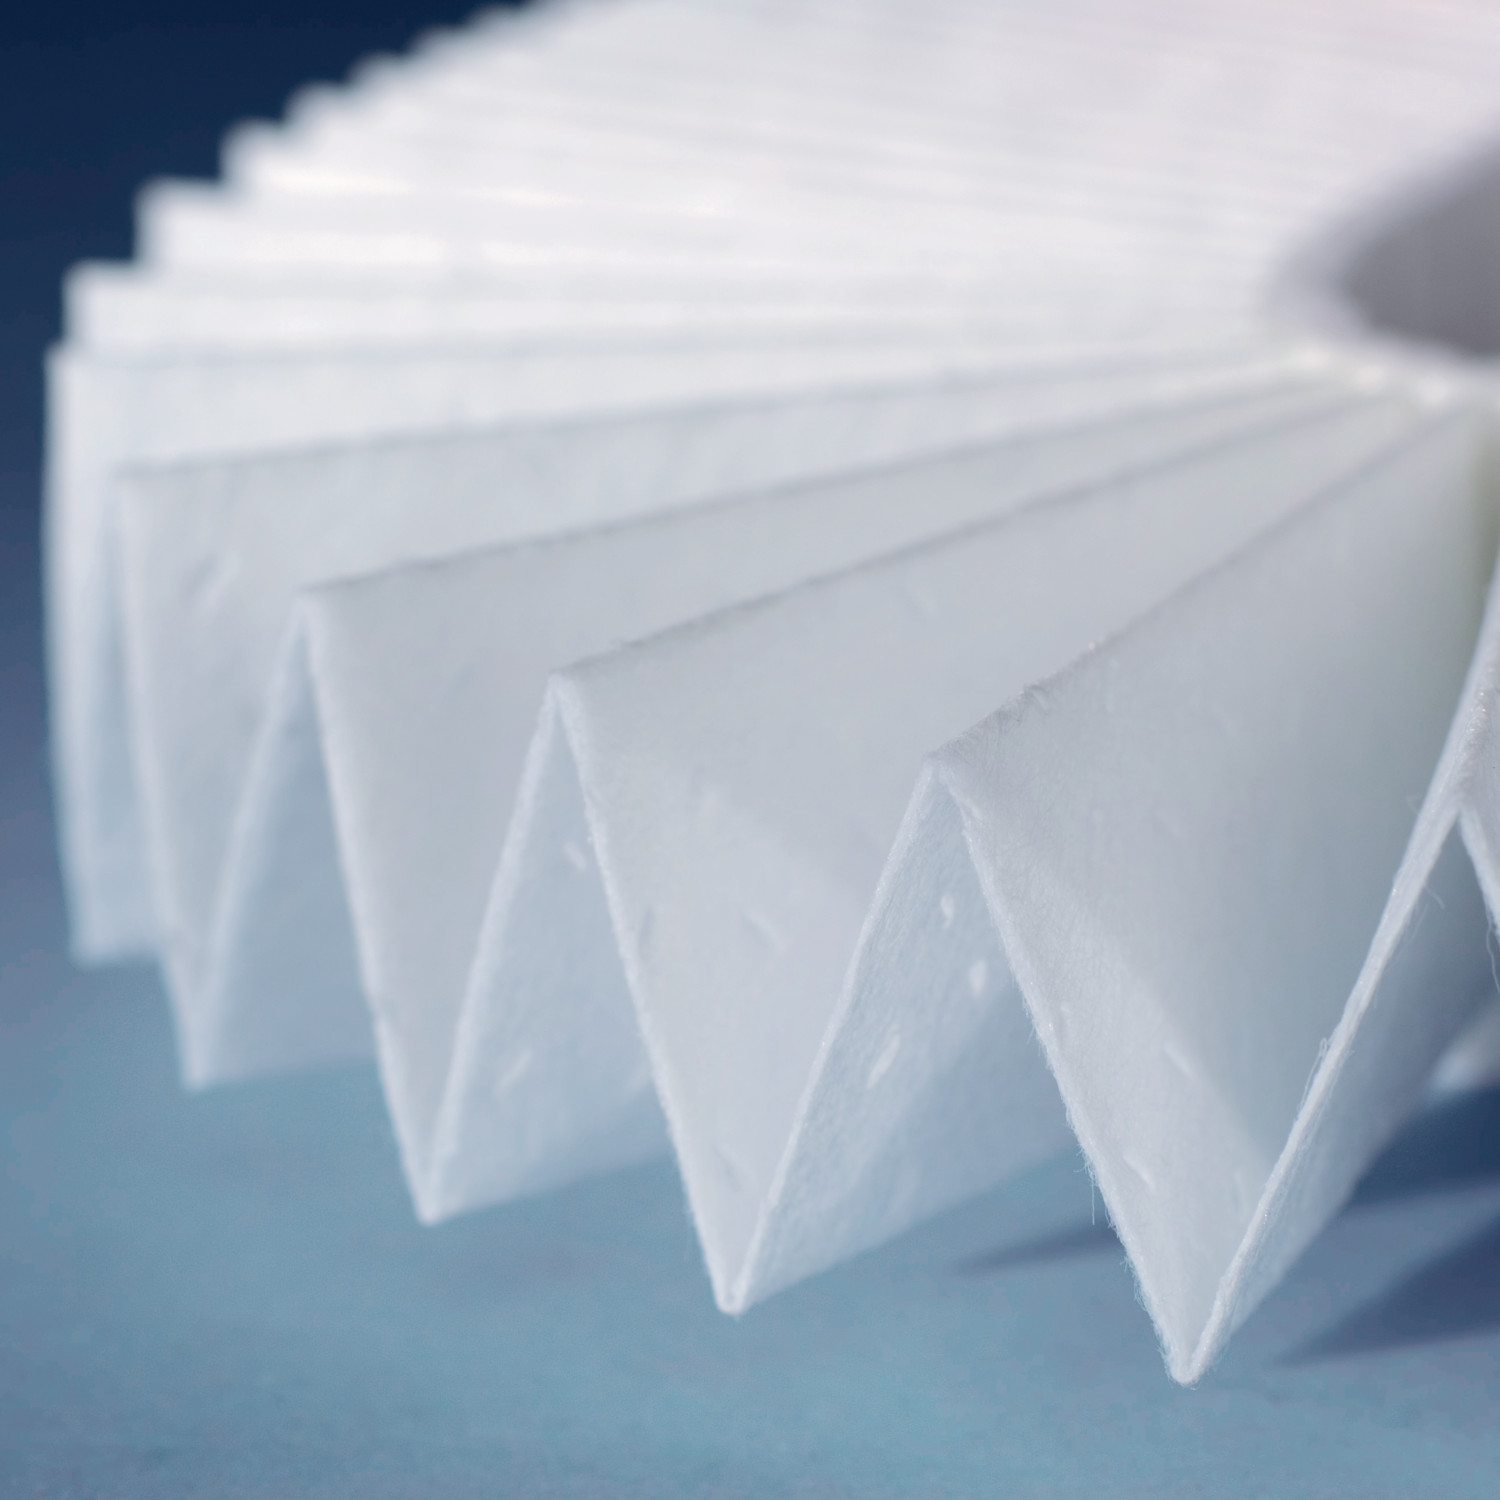 Environmentally friendly filter is made of special 3-ply, fully recyclable non-woven material